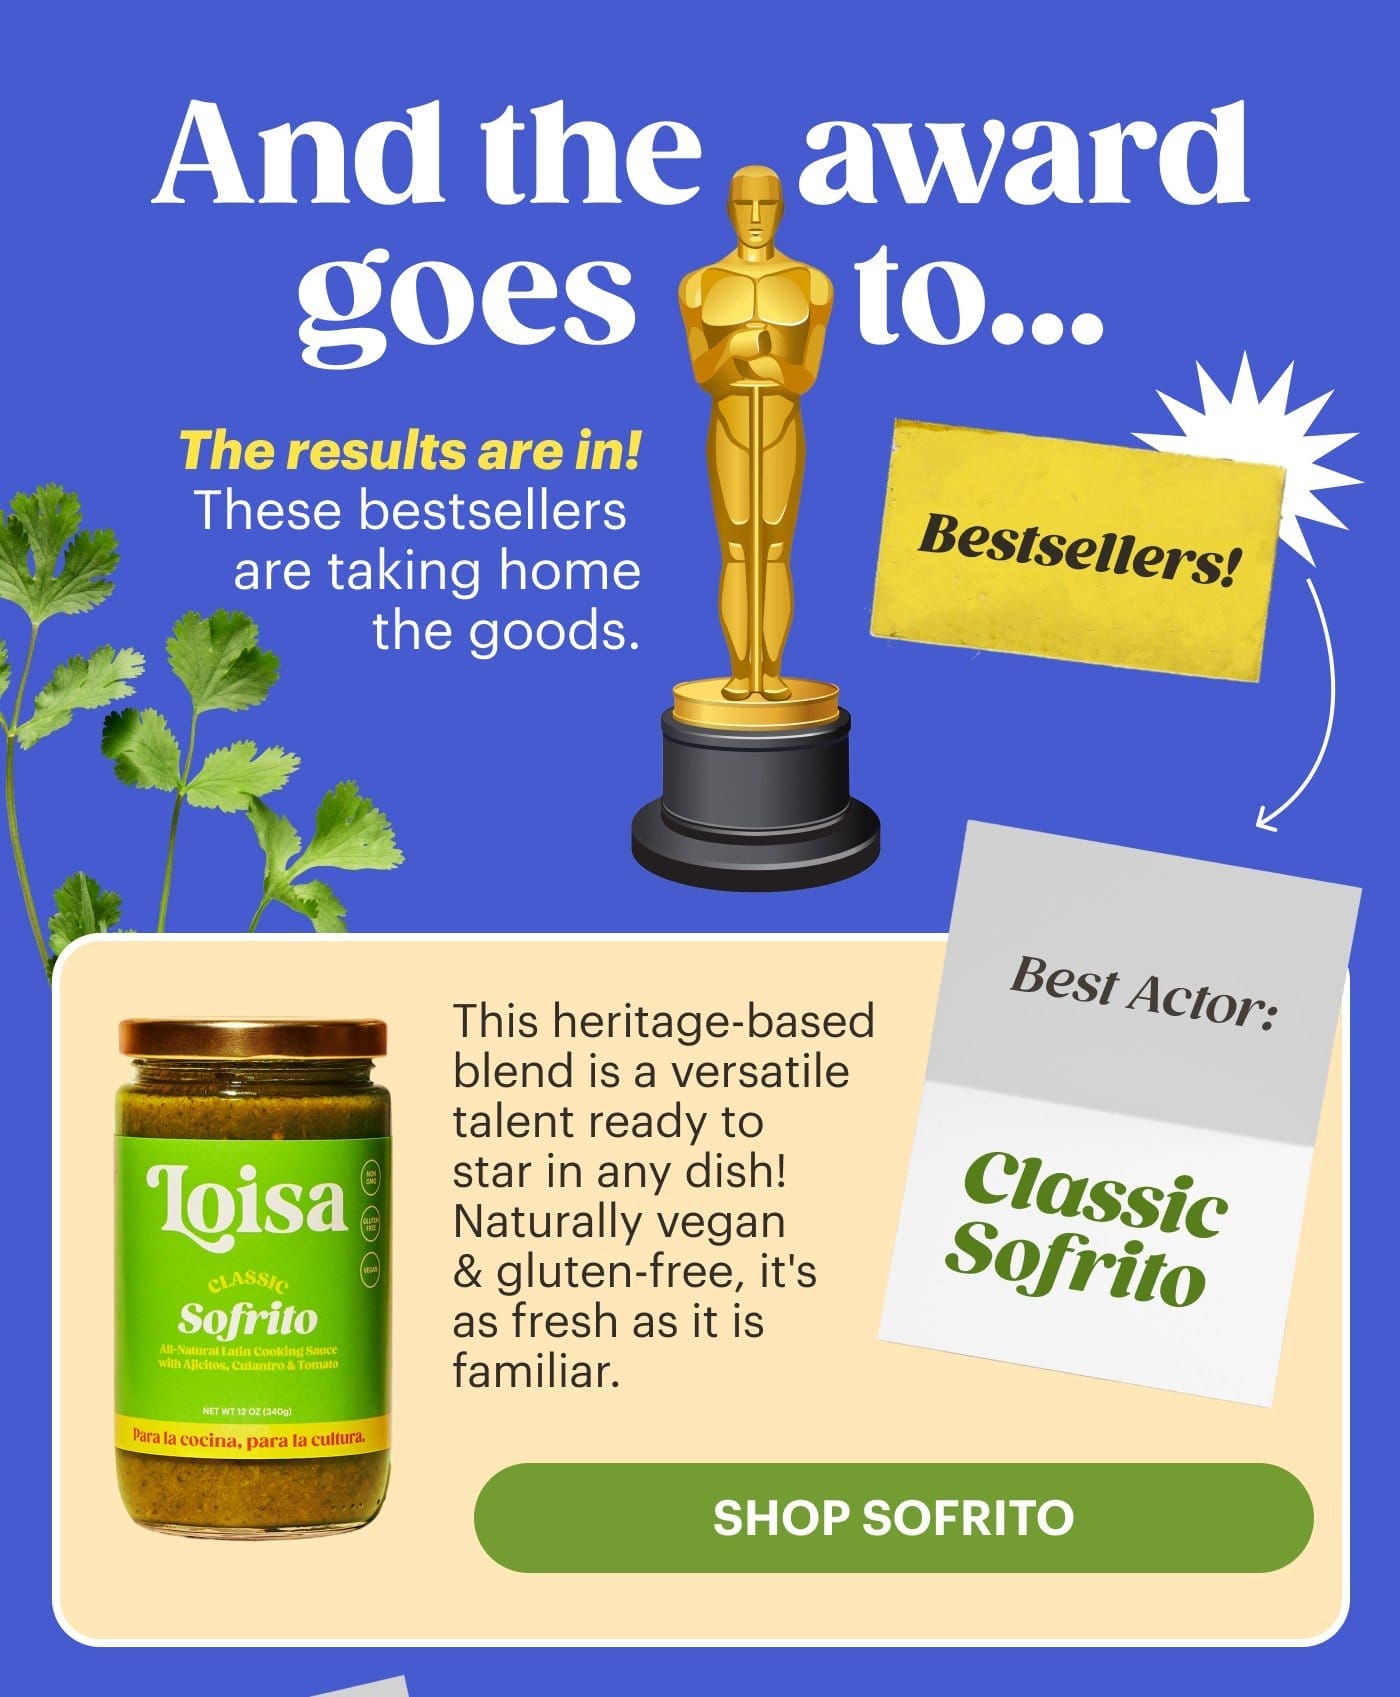 And the award goes to… SHOP SOFRITO